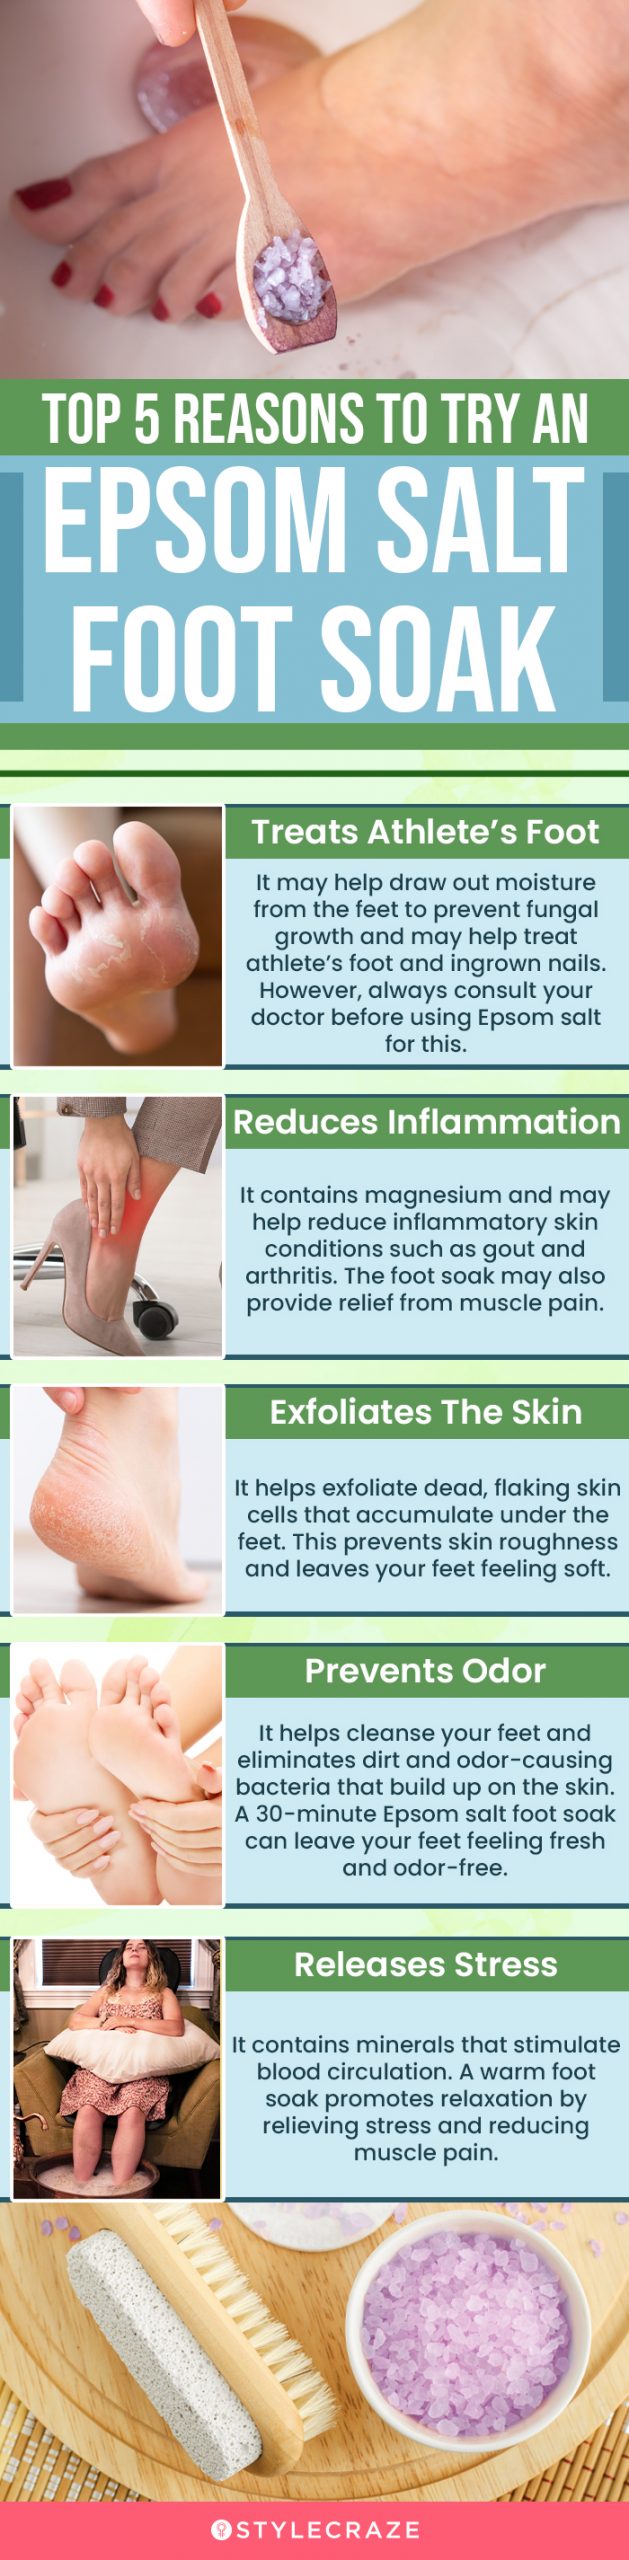 top 5 reasons to try an epsom salt foot soak (infographic)